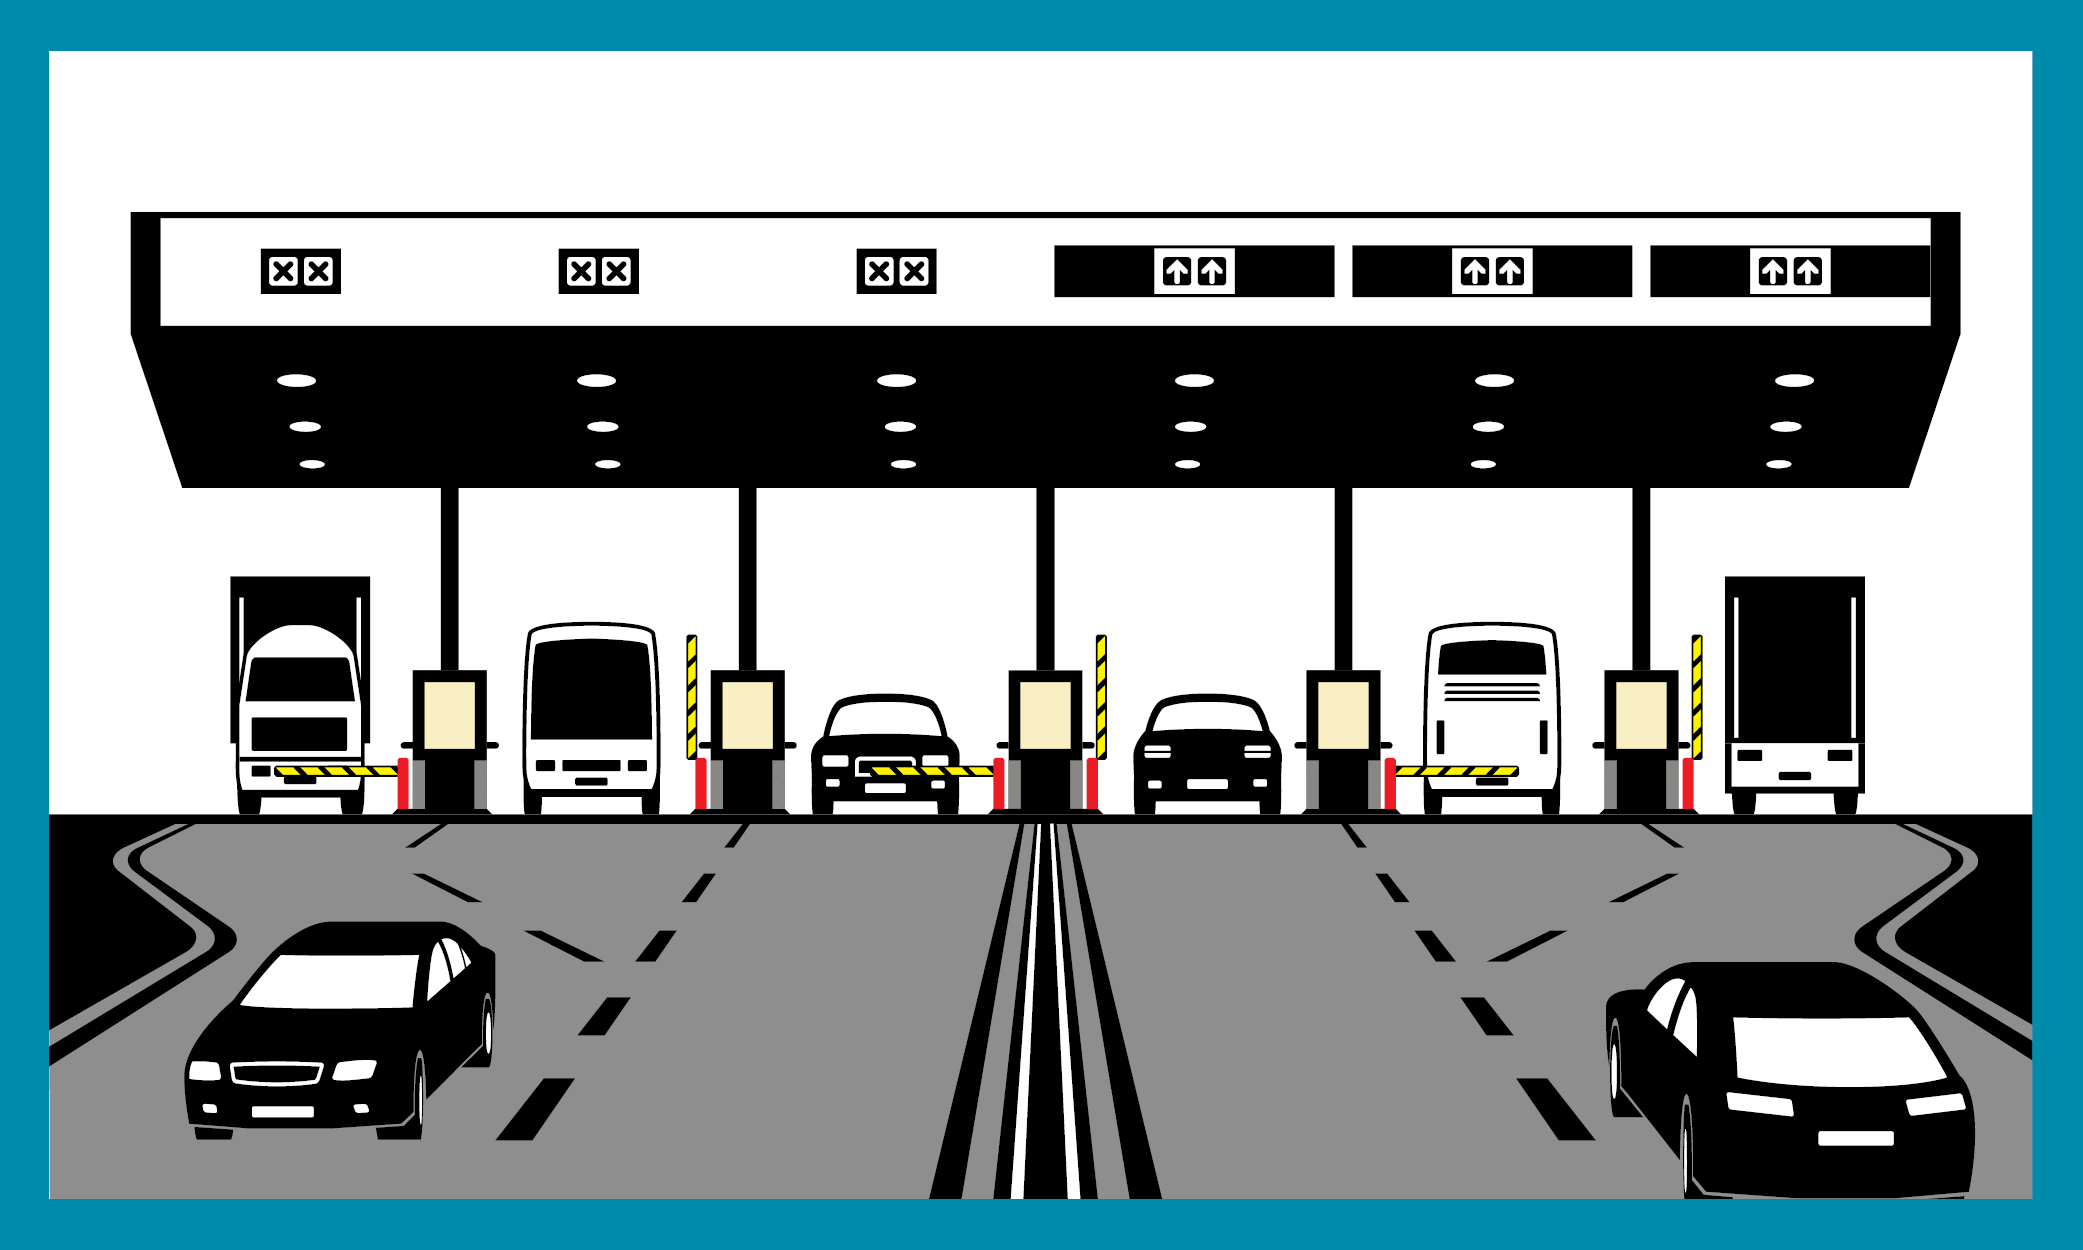 Step 4 – Food Safety Regulations and Information (toll booths)